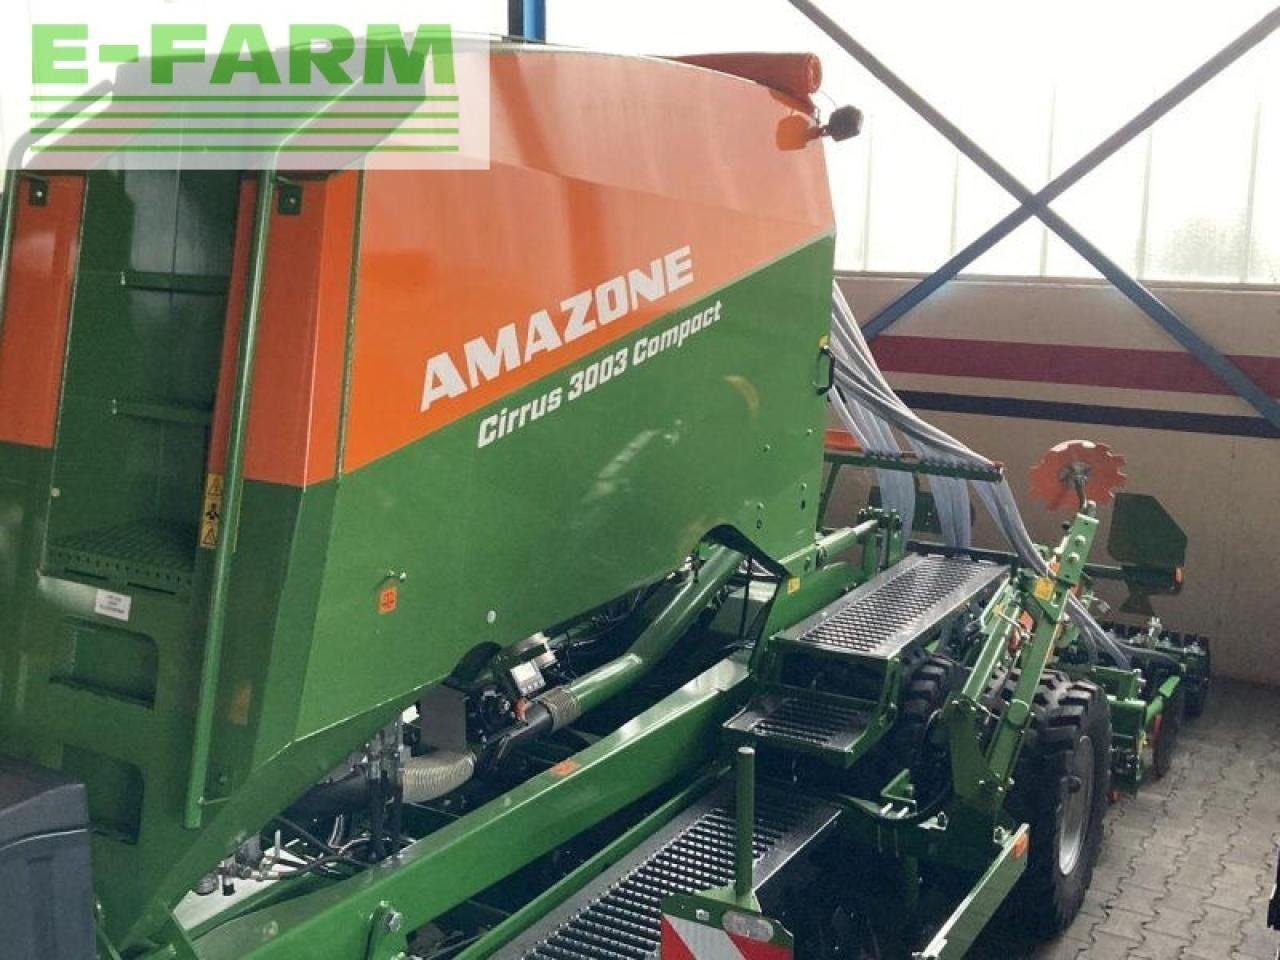 Seed drill Amazone cirrus 3003 compact: picture 4